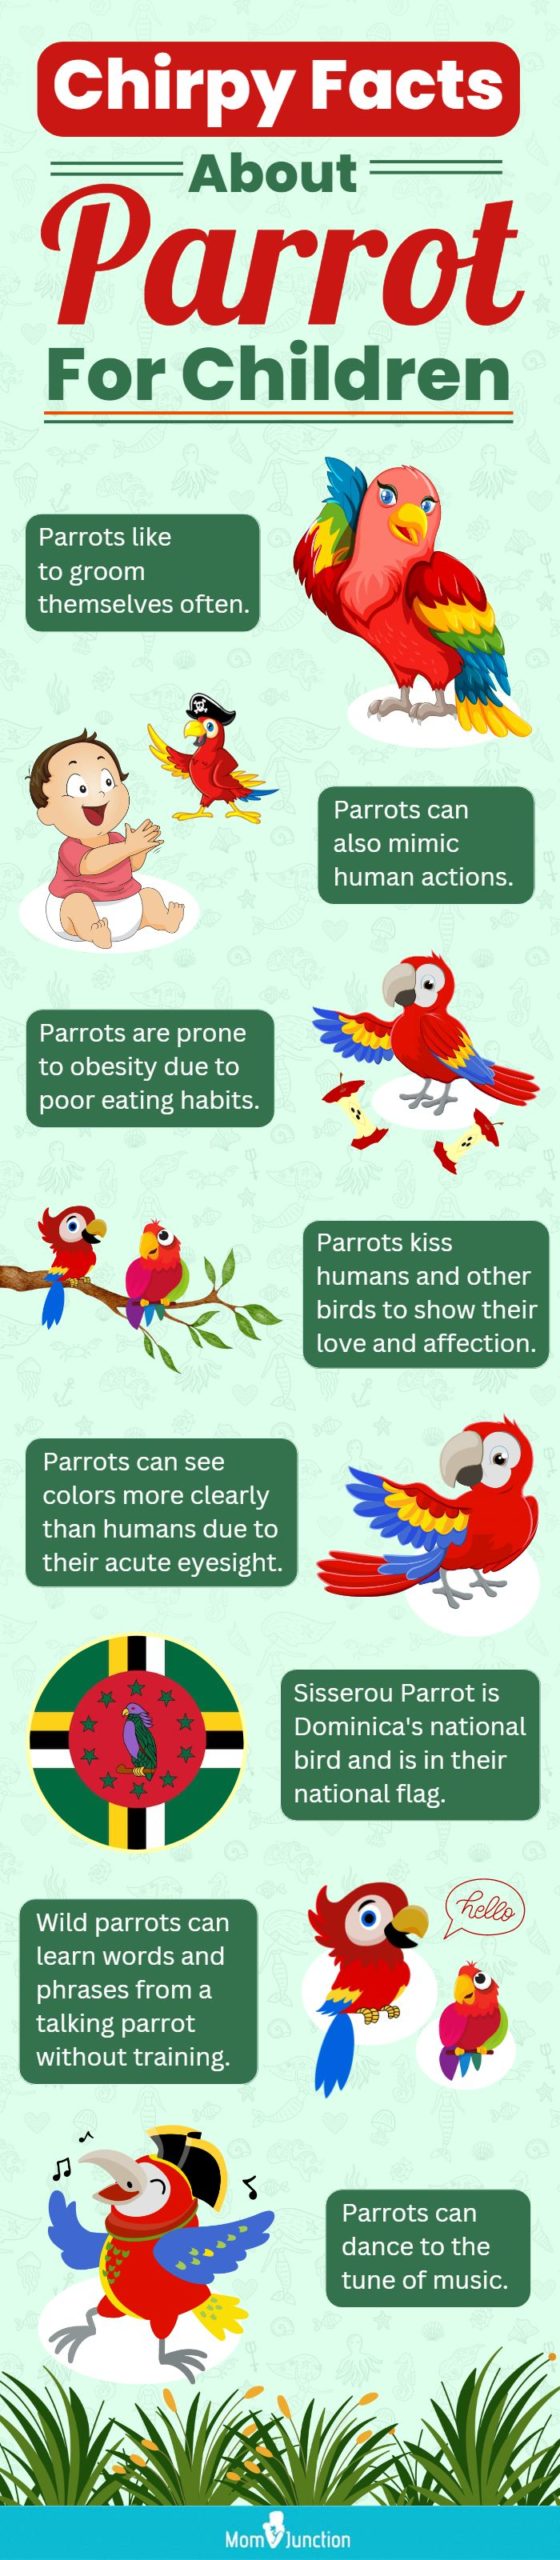 chirpy facts about parrot for children (infographic)